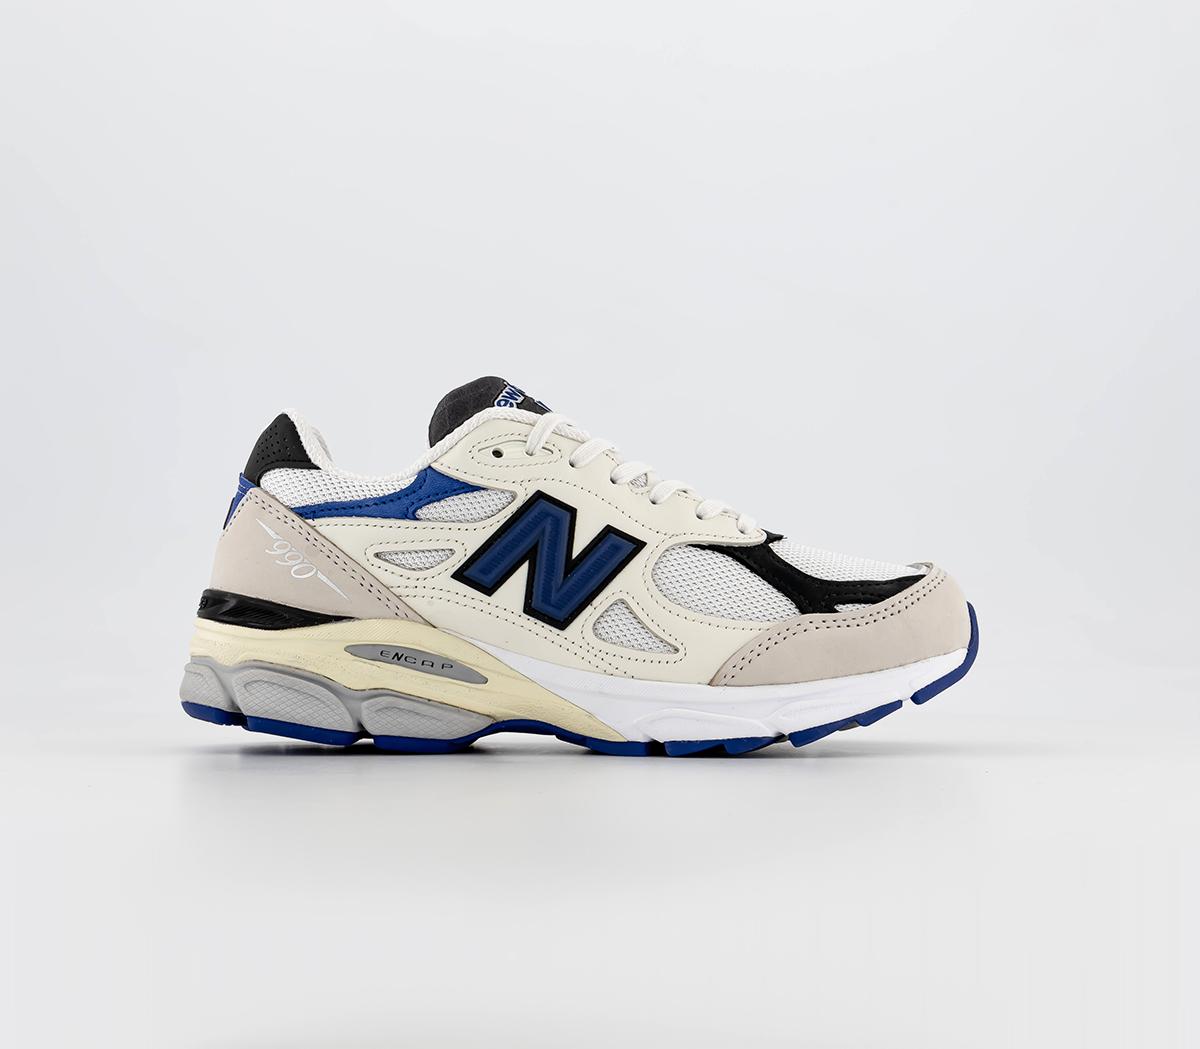 New Balance990v3 Made in USA Trainers White